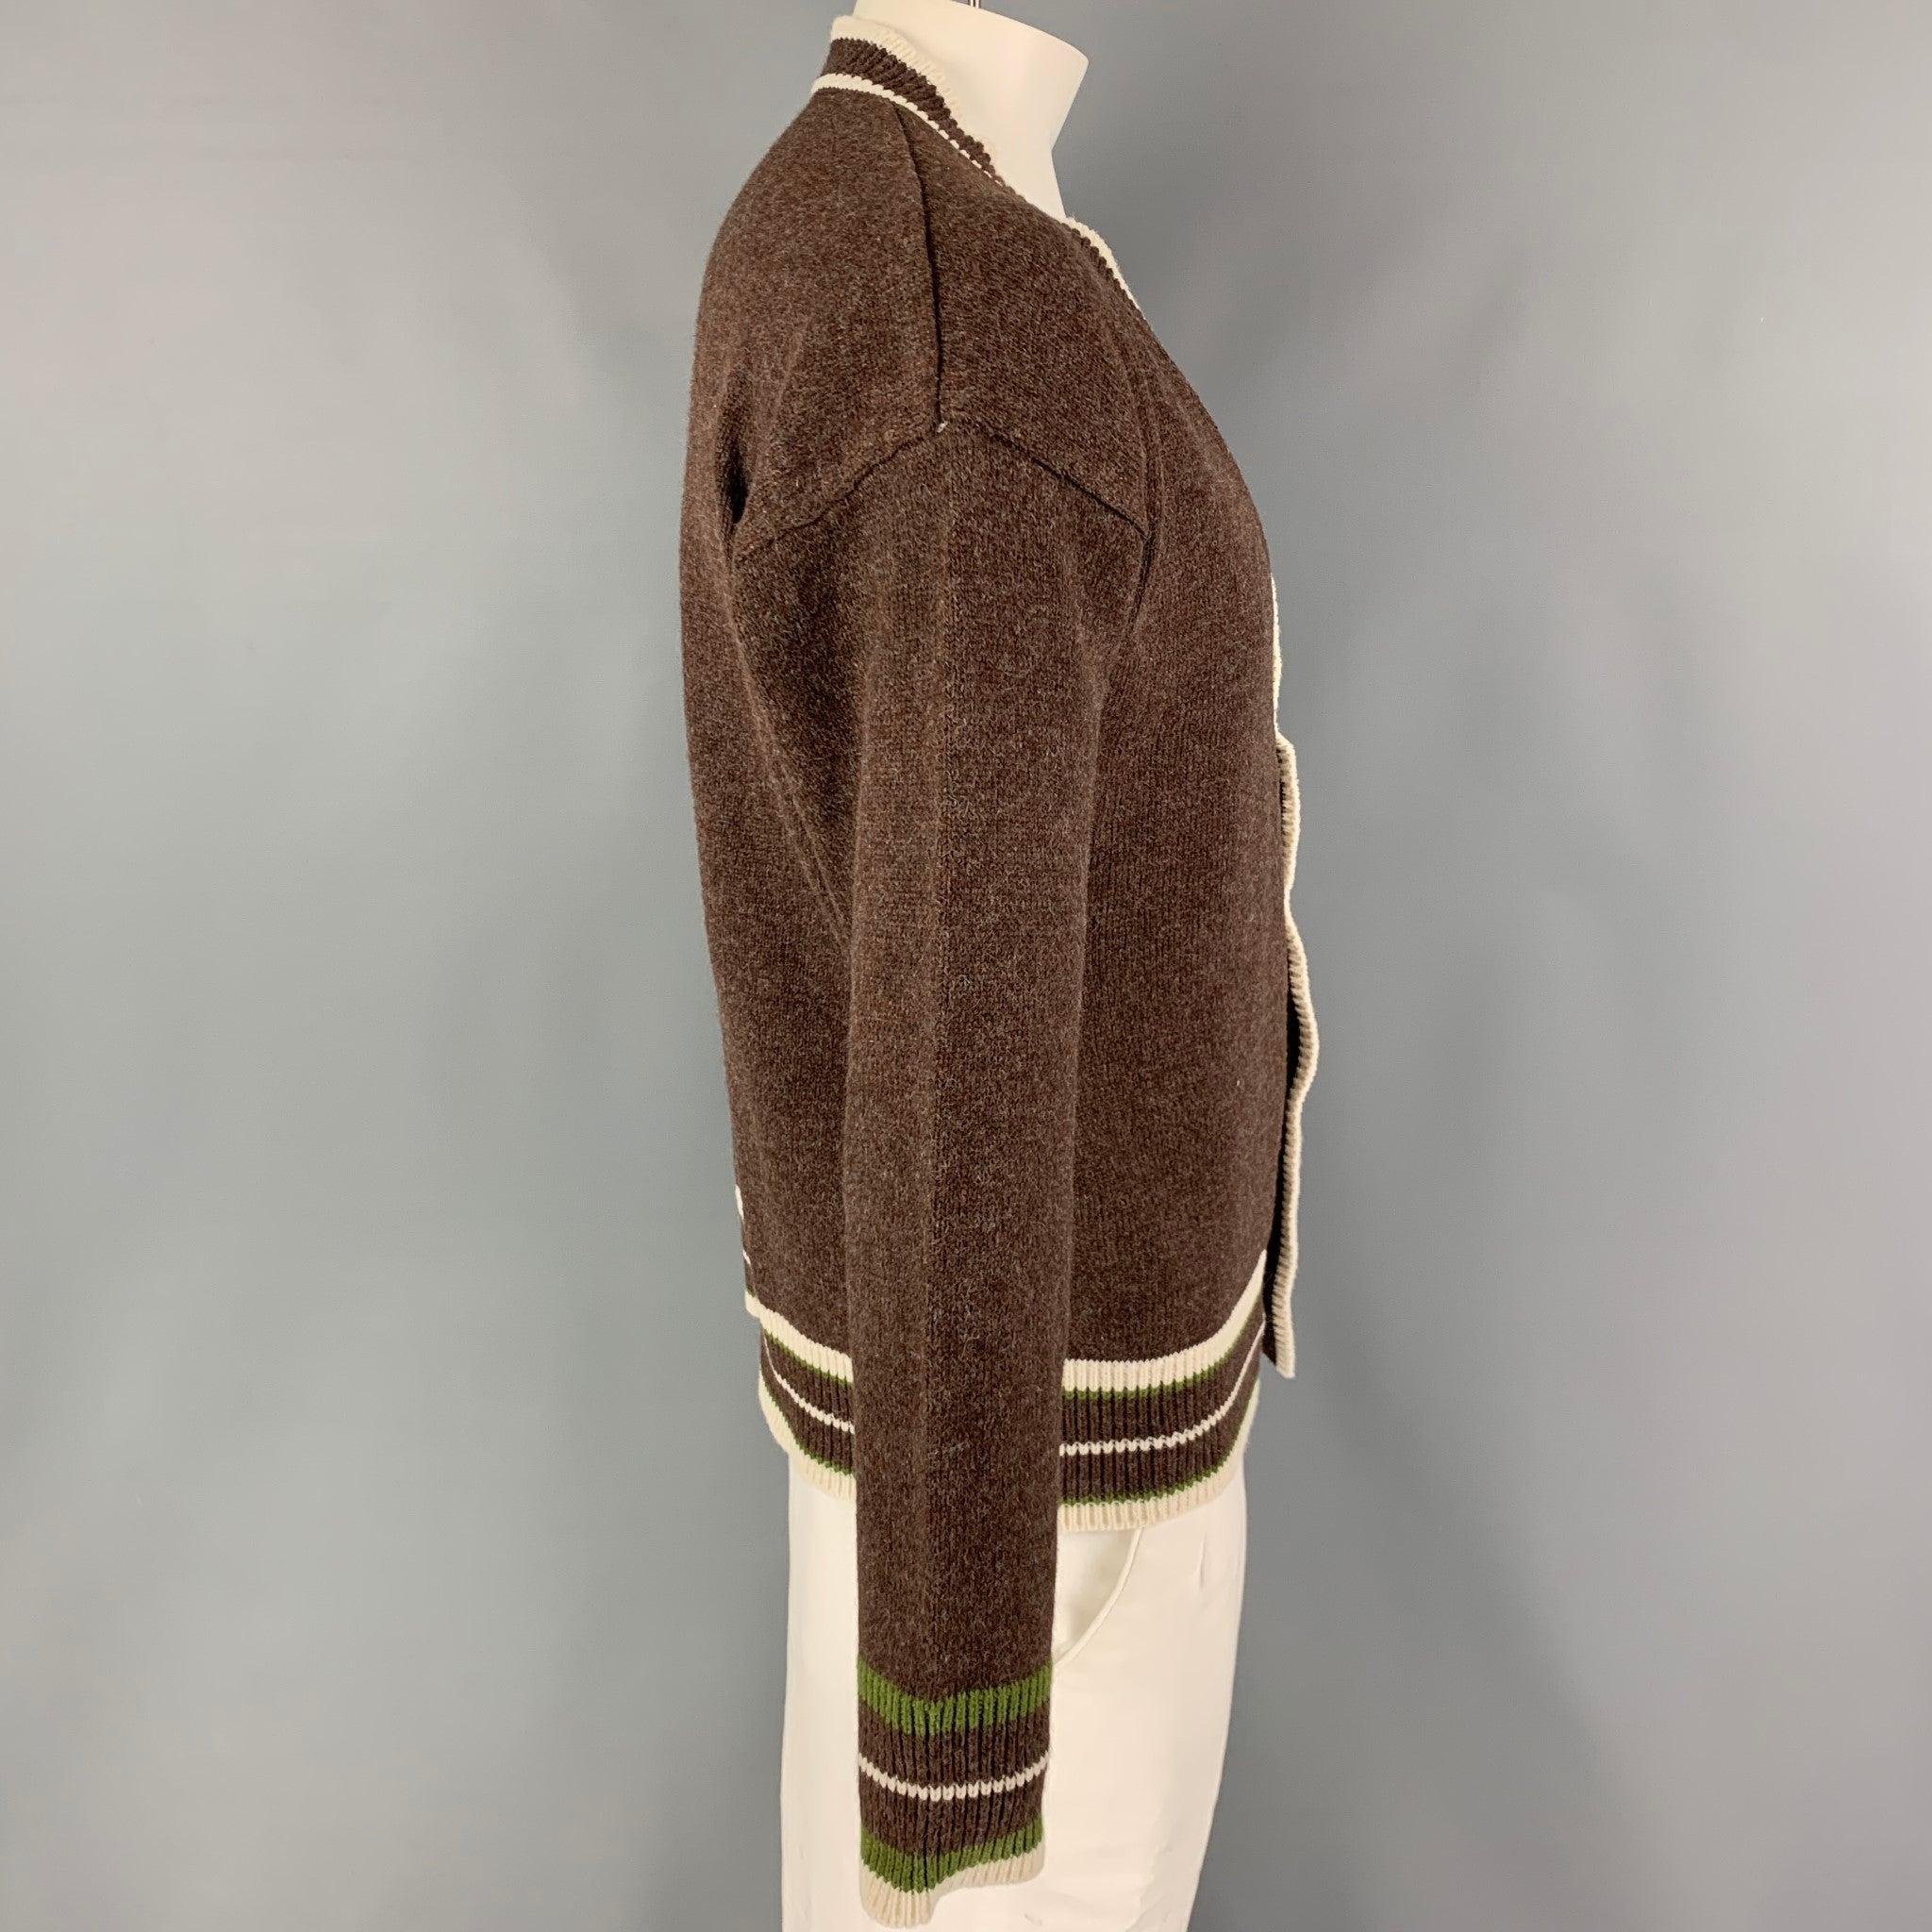 KITON cardigan comes in a brown knitted cotton featuring a cream contrast trim and a buttoned closure. Made in Italy.
New with tags.
 

Marked:   M/50 

Measurements: 
 
Shoulder: 24 inches Chest: 46 inches Sleeve: 23 inches Length: 27 inches 
  
 